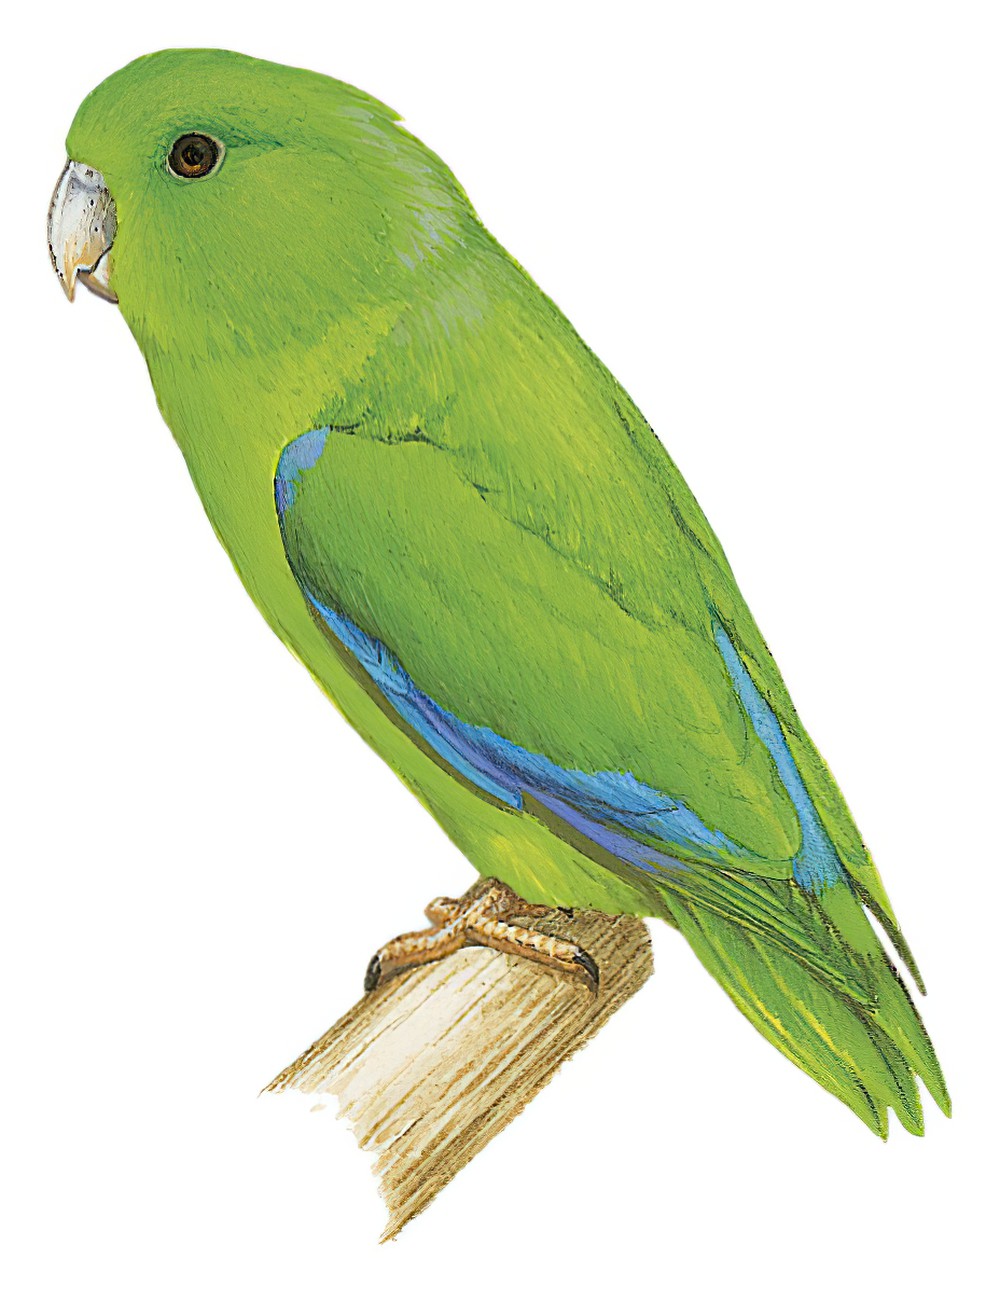 Blue-winged Parrotlet / Forpus xanthopterygius